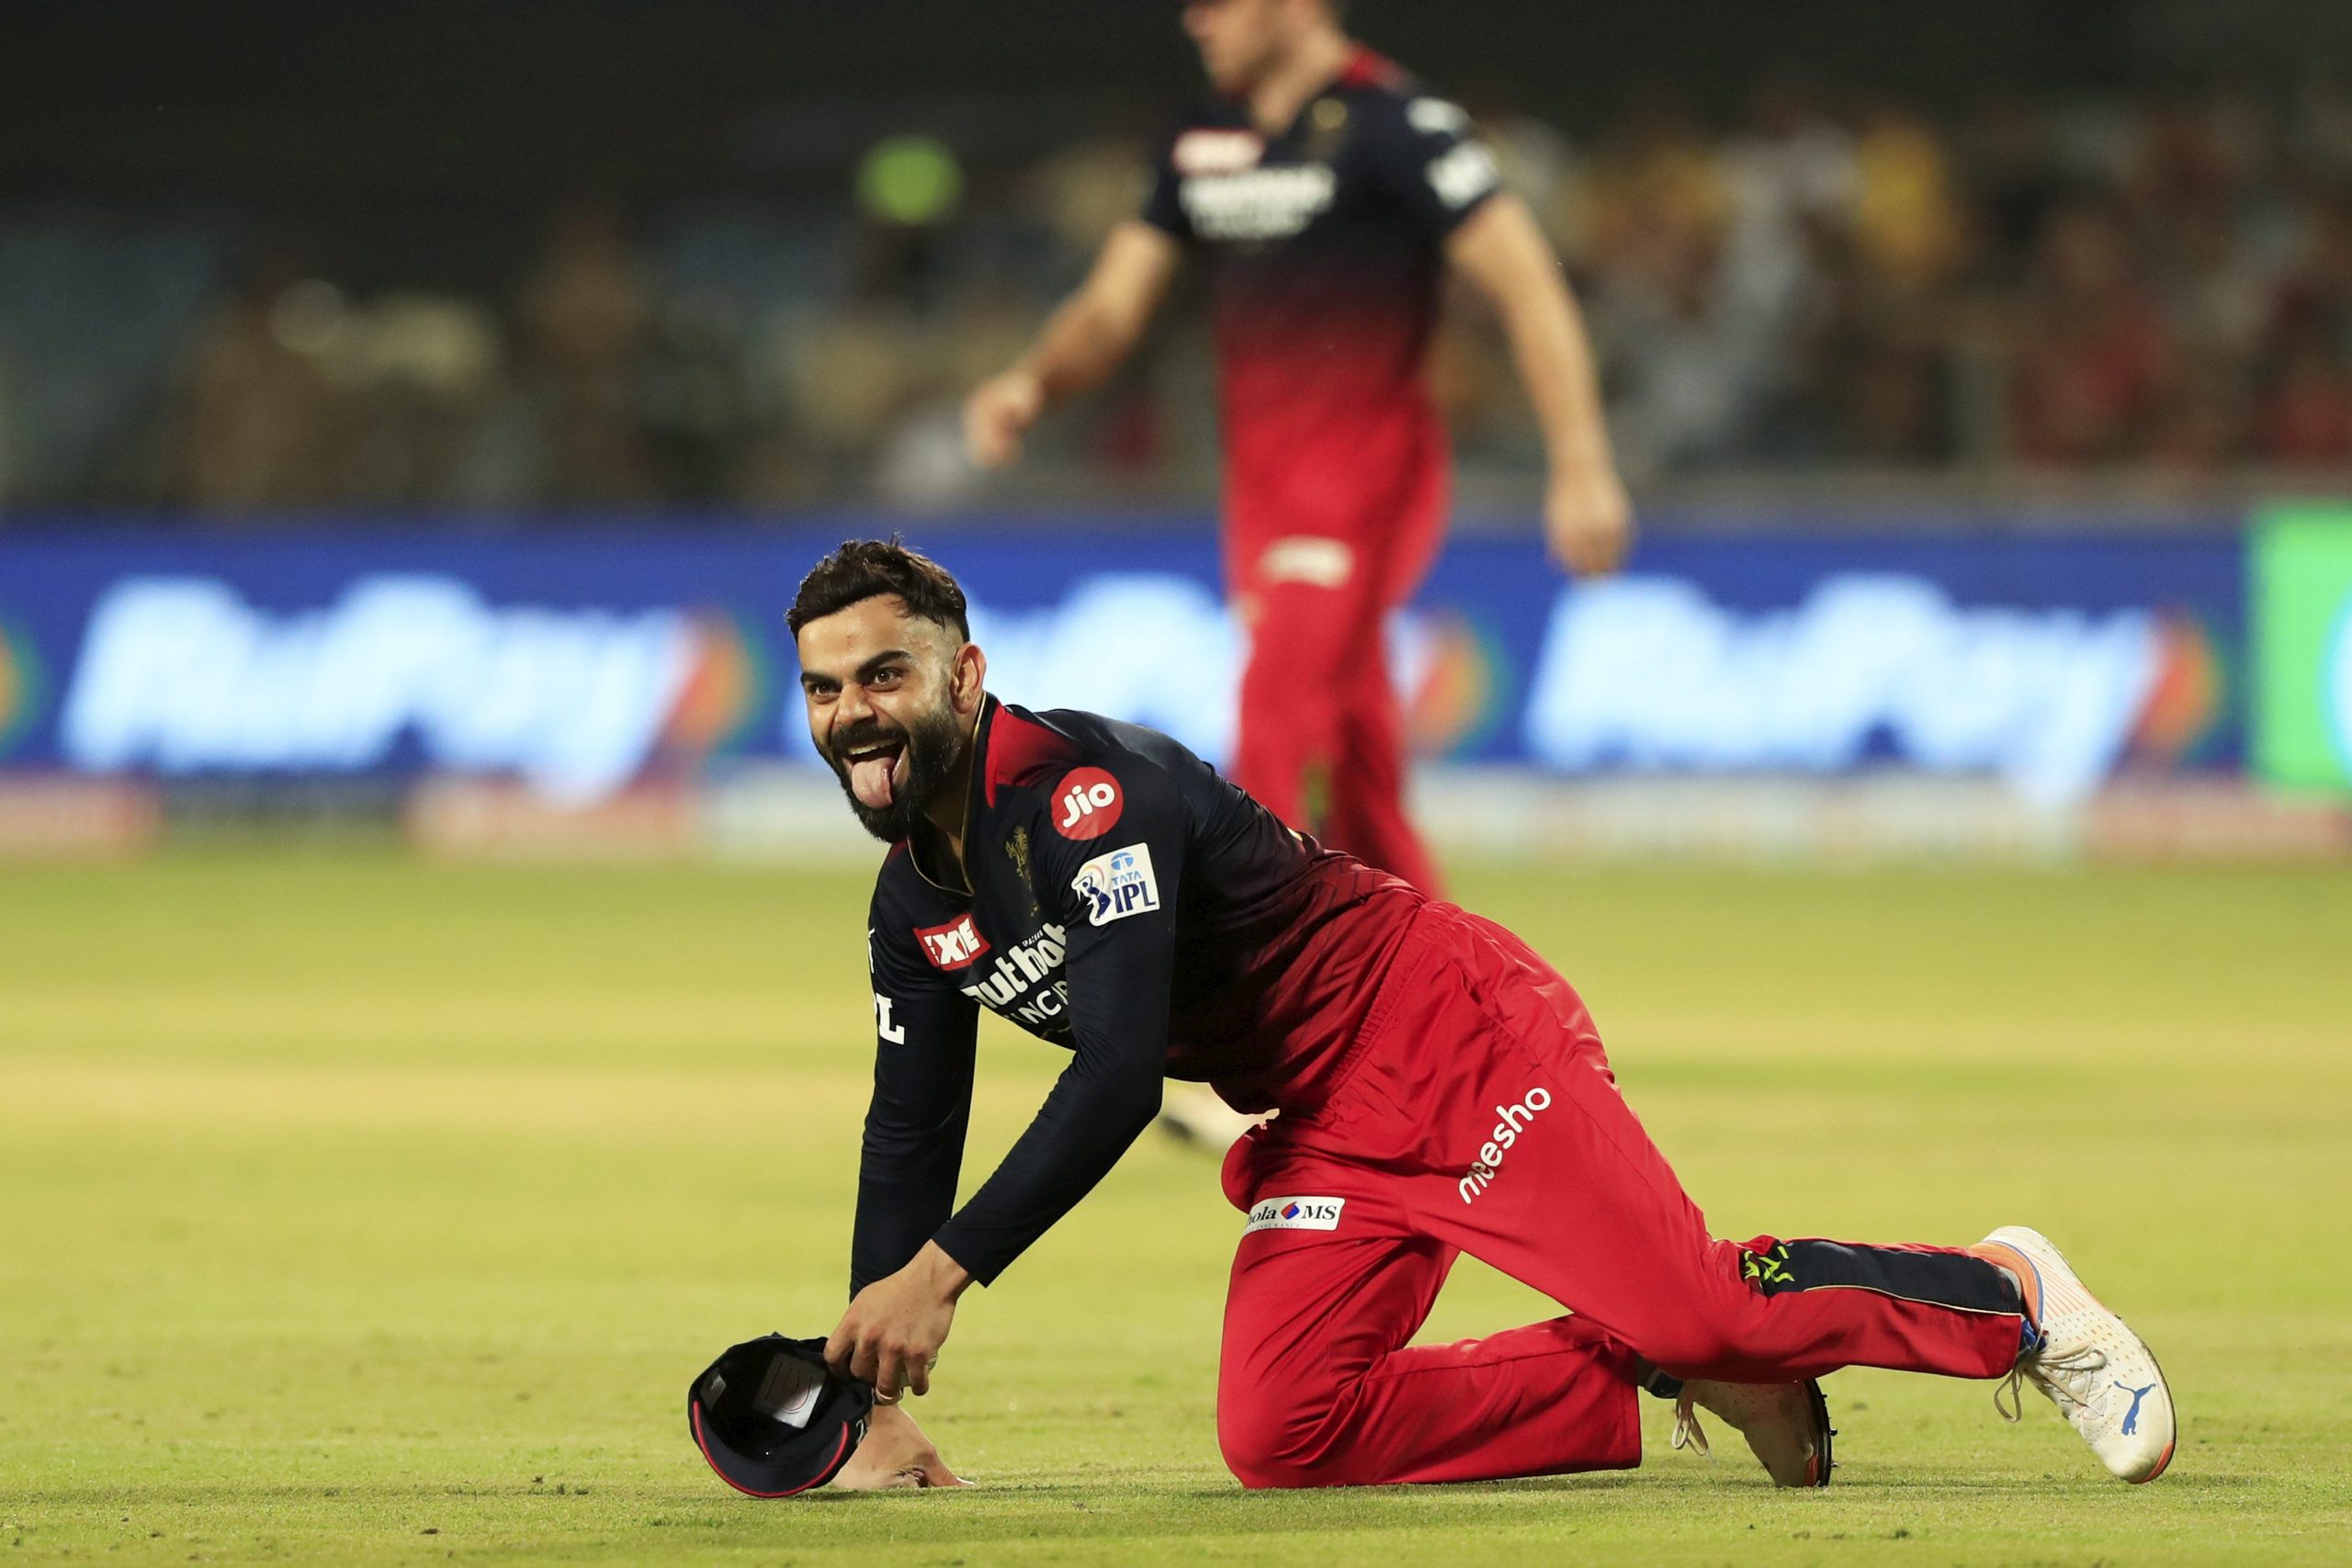 IPL 2022: With playoff berth at stake, Royal Challengers Bangalore look for big win vs Gujarat Titans